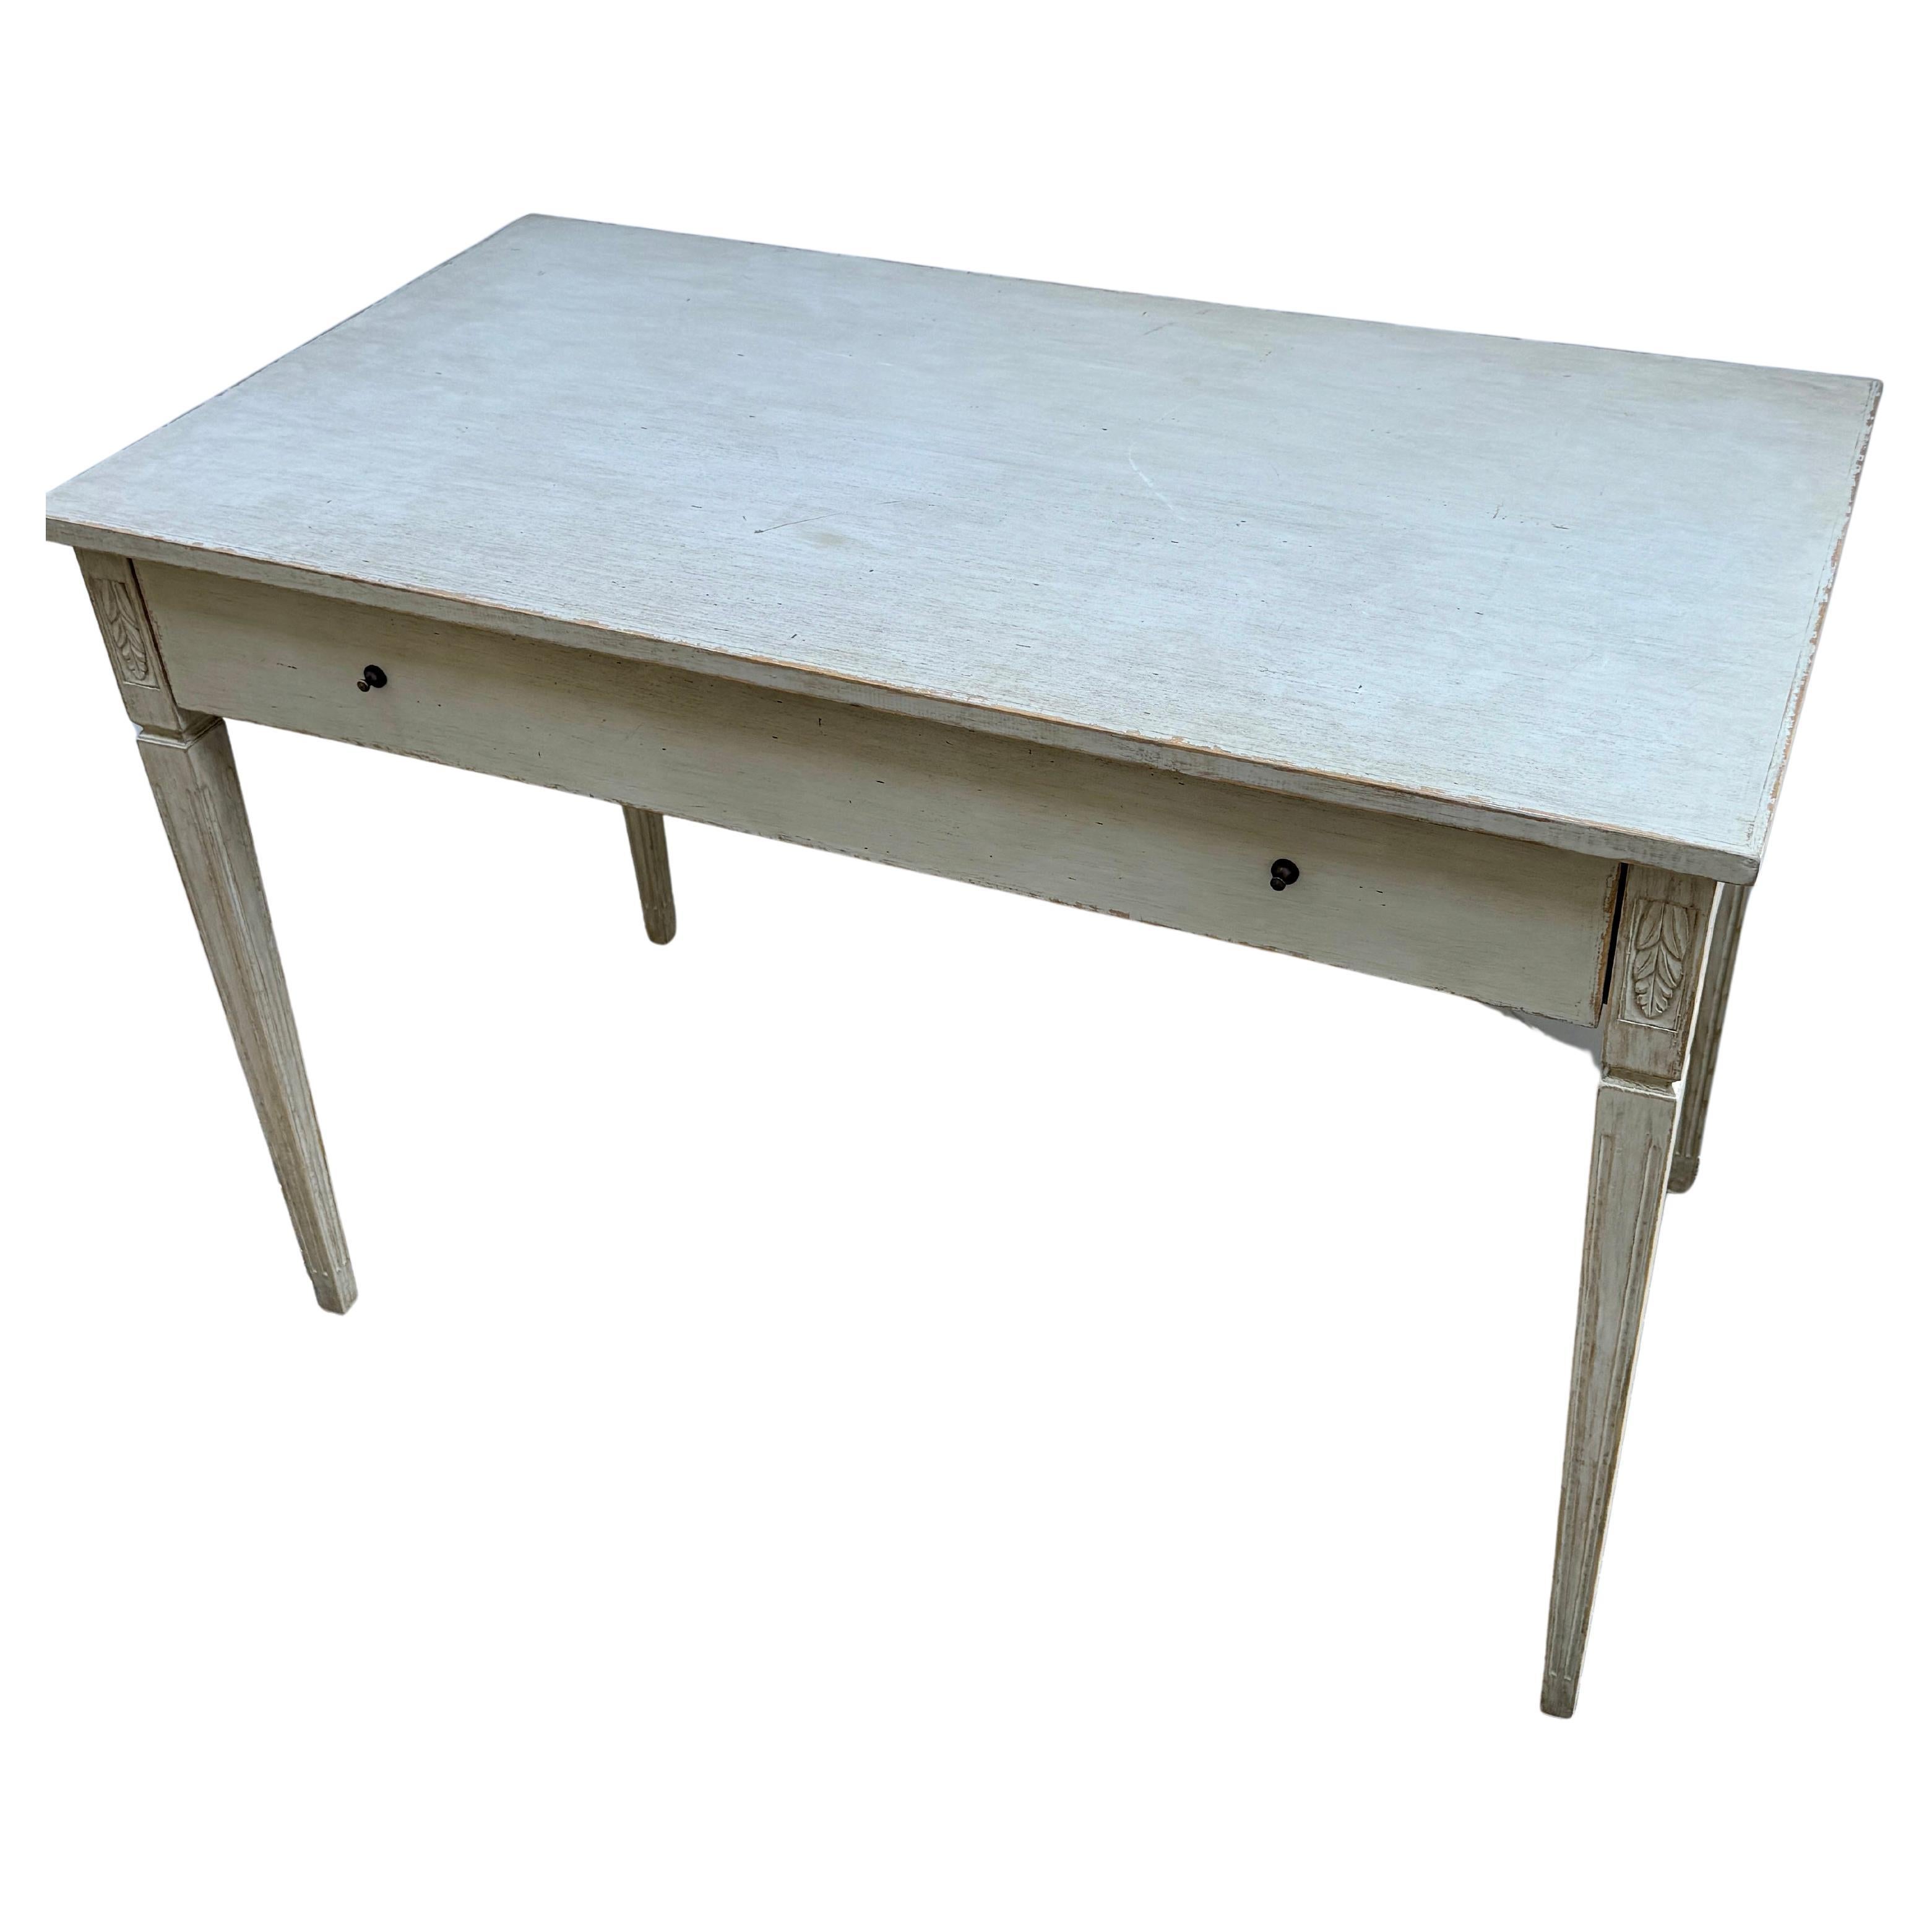 Gustavian Style Painted Writing Desk With Drawer

Classic and simple Scandinavian style writing desk. Hand carved and hand painted. Drawer knobs are bronze patinated. Wonderful piece for an office, library or sitting room. 